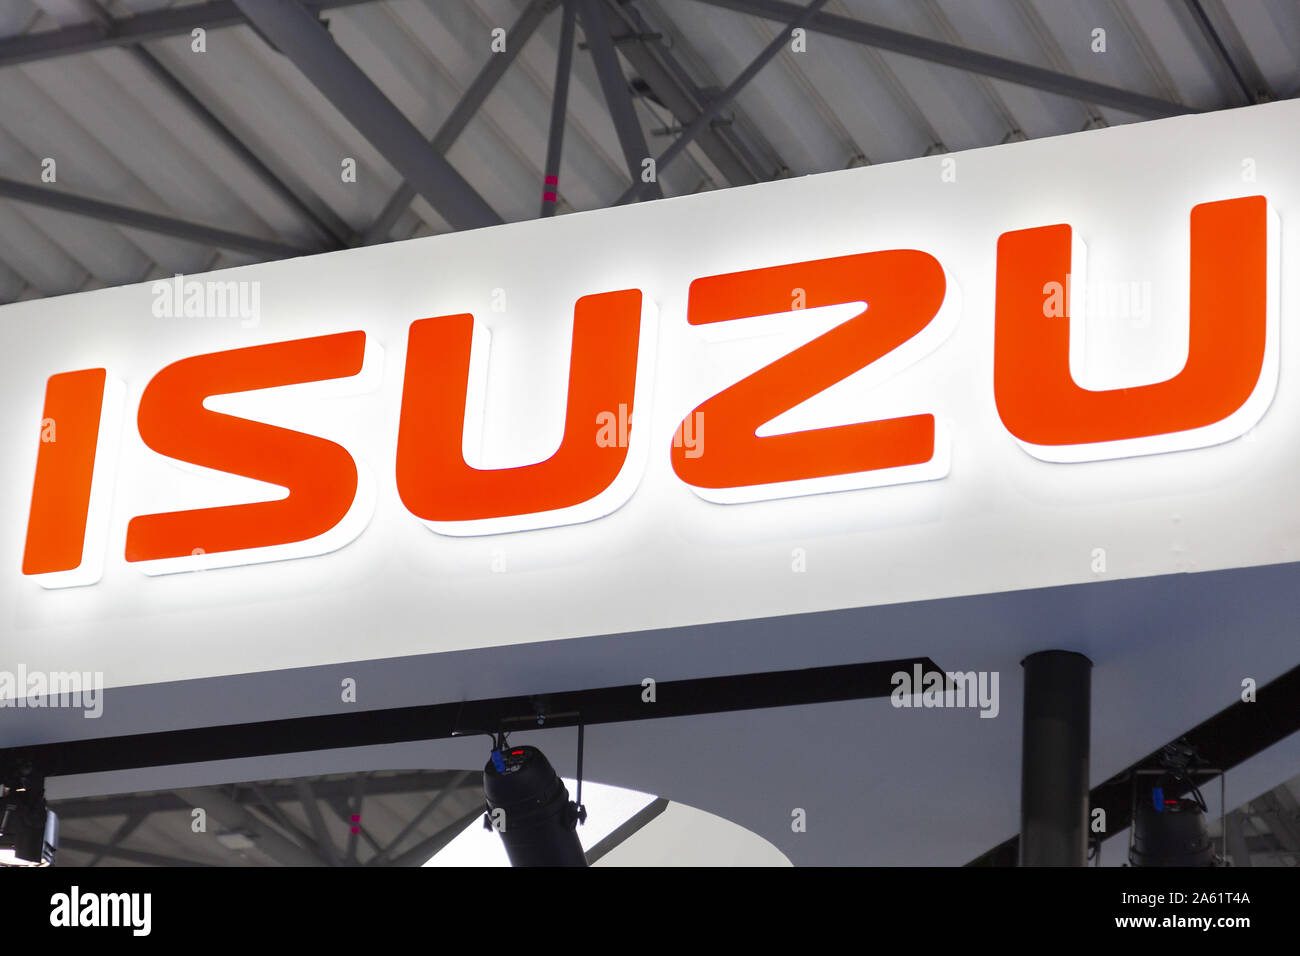 Tokyo, Japan. 23rd Oct, 2019. A logo of Isuzu is seen during a press preview of the 46th Tokyo Motor Show 2019 in Tokyo Big Sight. Tokyo Motor Show 2019 showcases new mobility technologies from Japanese and overseas automakers. The exhibition is open to the public from October 25 to November 4. Credit: Rodrigo Reyes Marin/ZUMA Wire/Alamy Live News Stock Photo